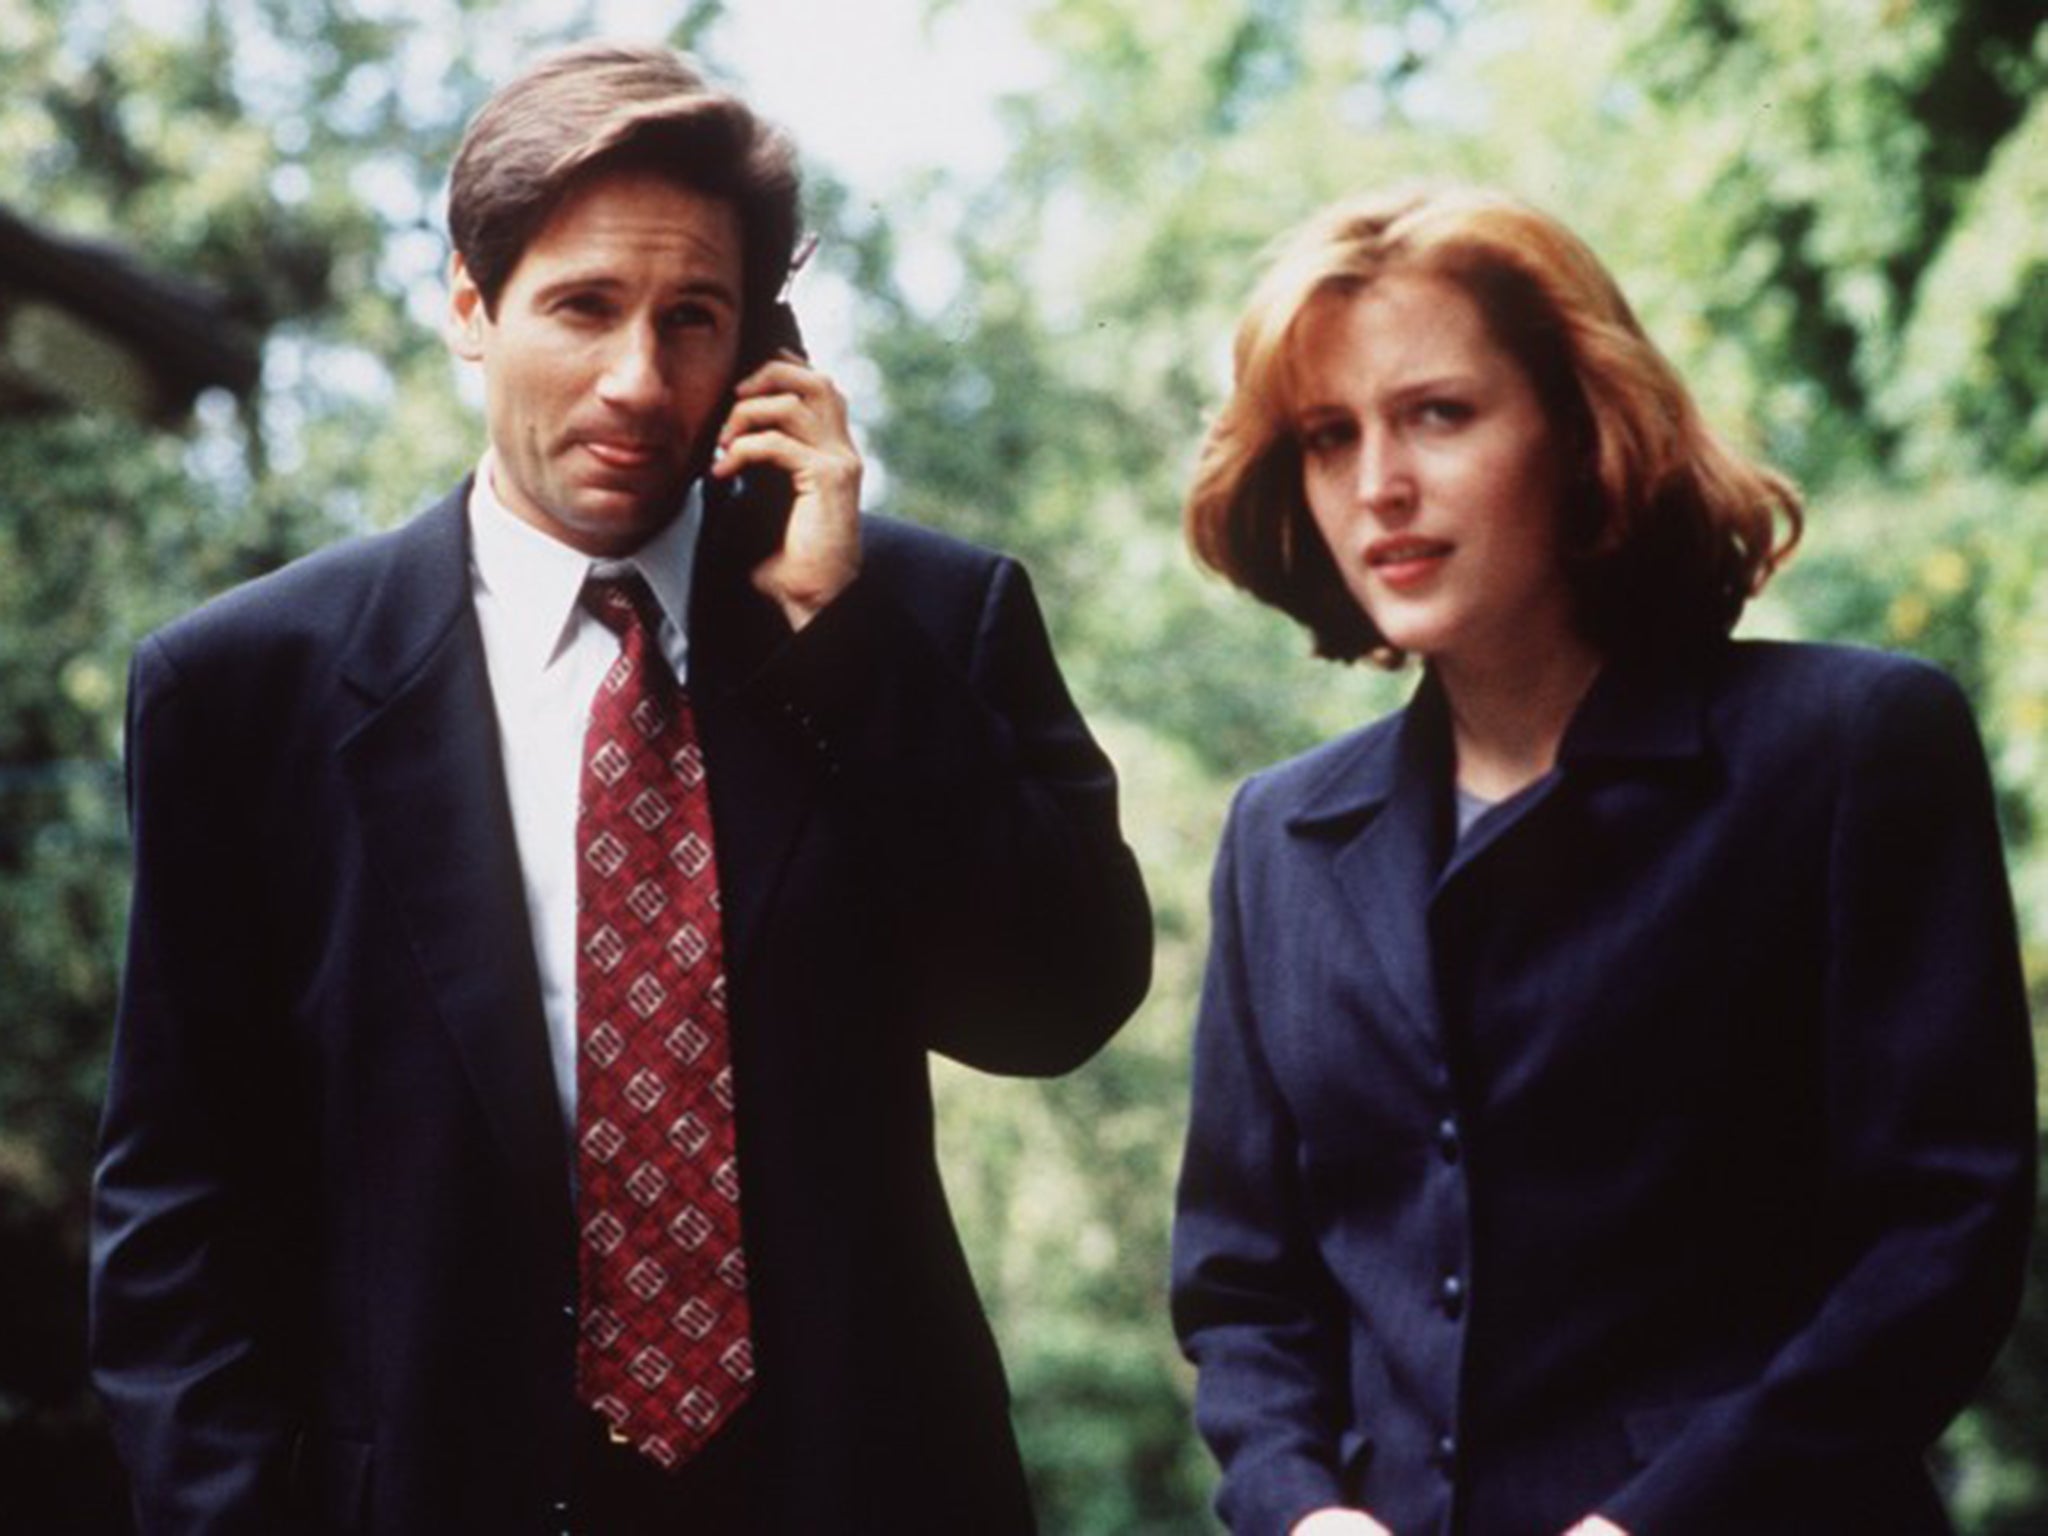 A case for Mulder and Scully? David Duchovny and Gillian Anderson in ‘The X-Files’